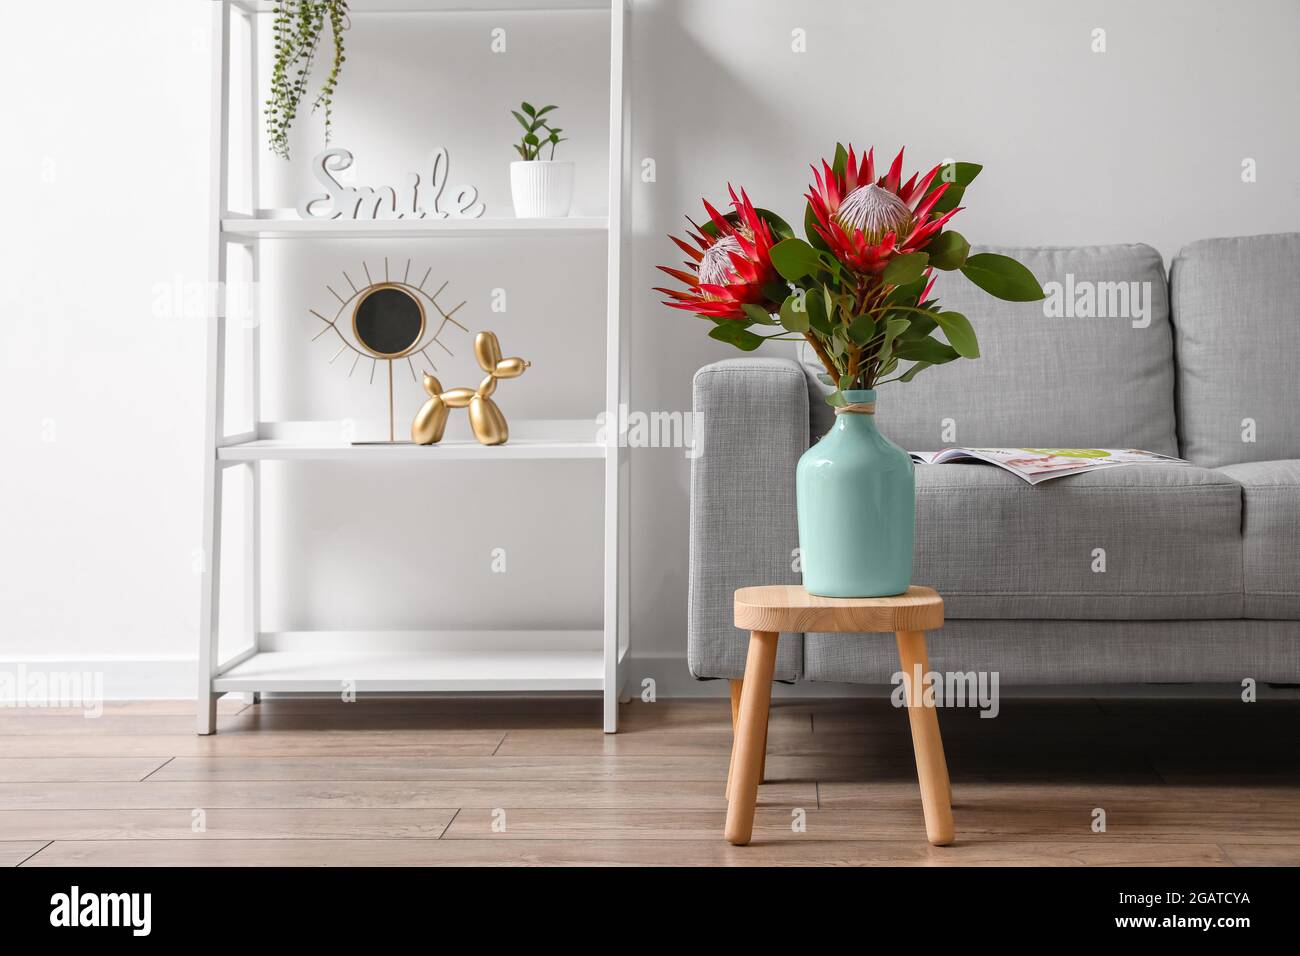 Table with protea flowers and sofa in interior of room Stock Photo - Alamy